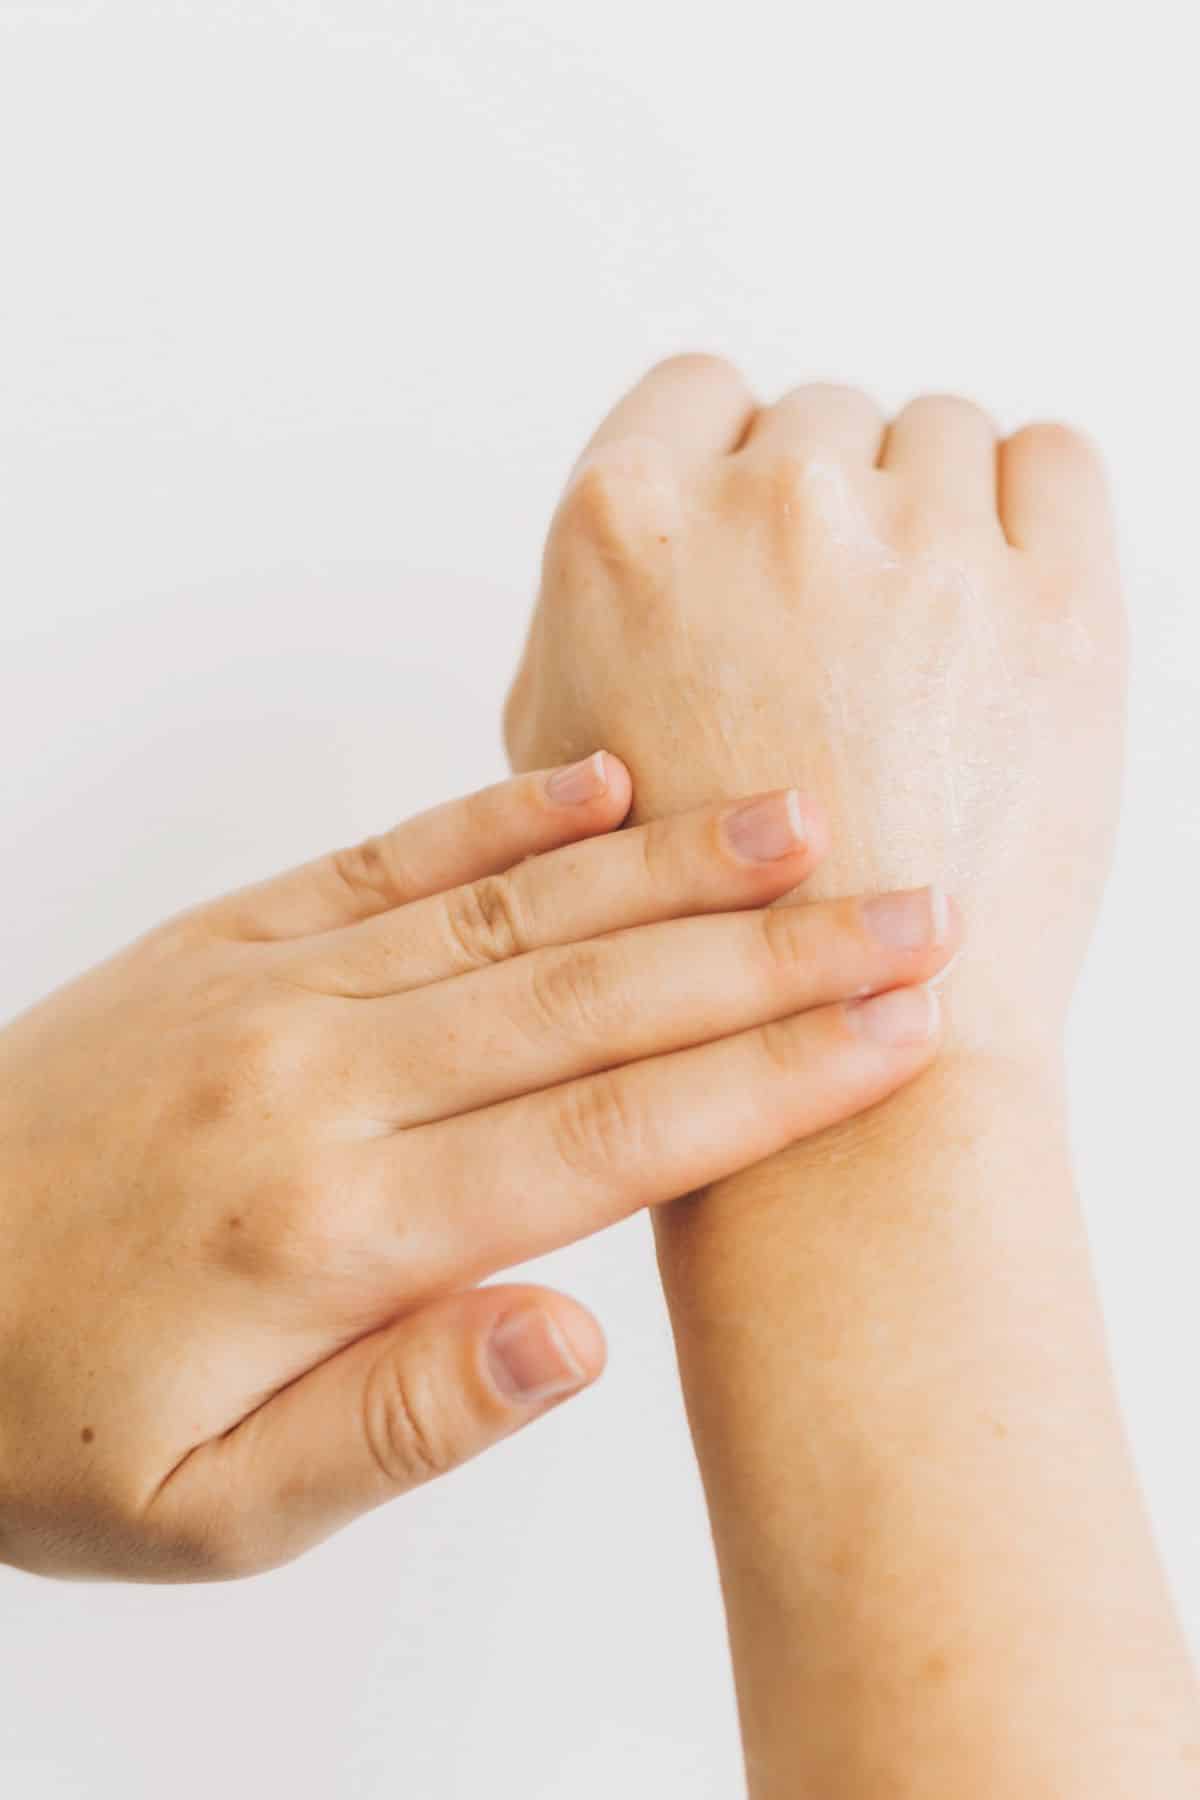 a woman rubbing a patch of dry skin on her hand.